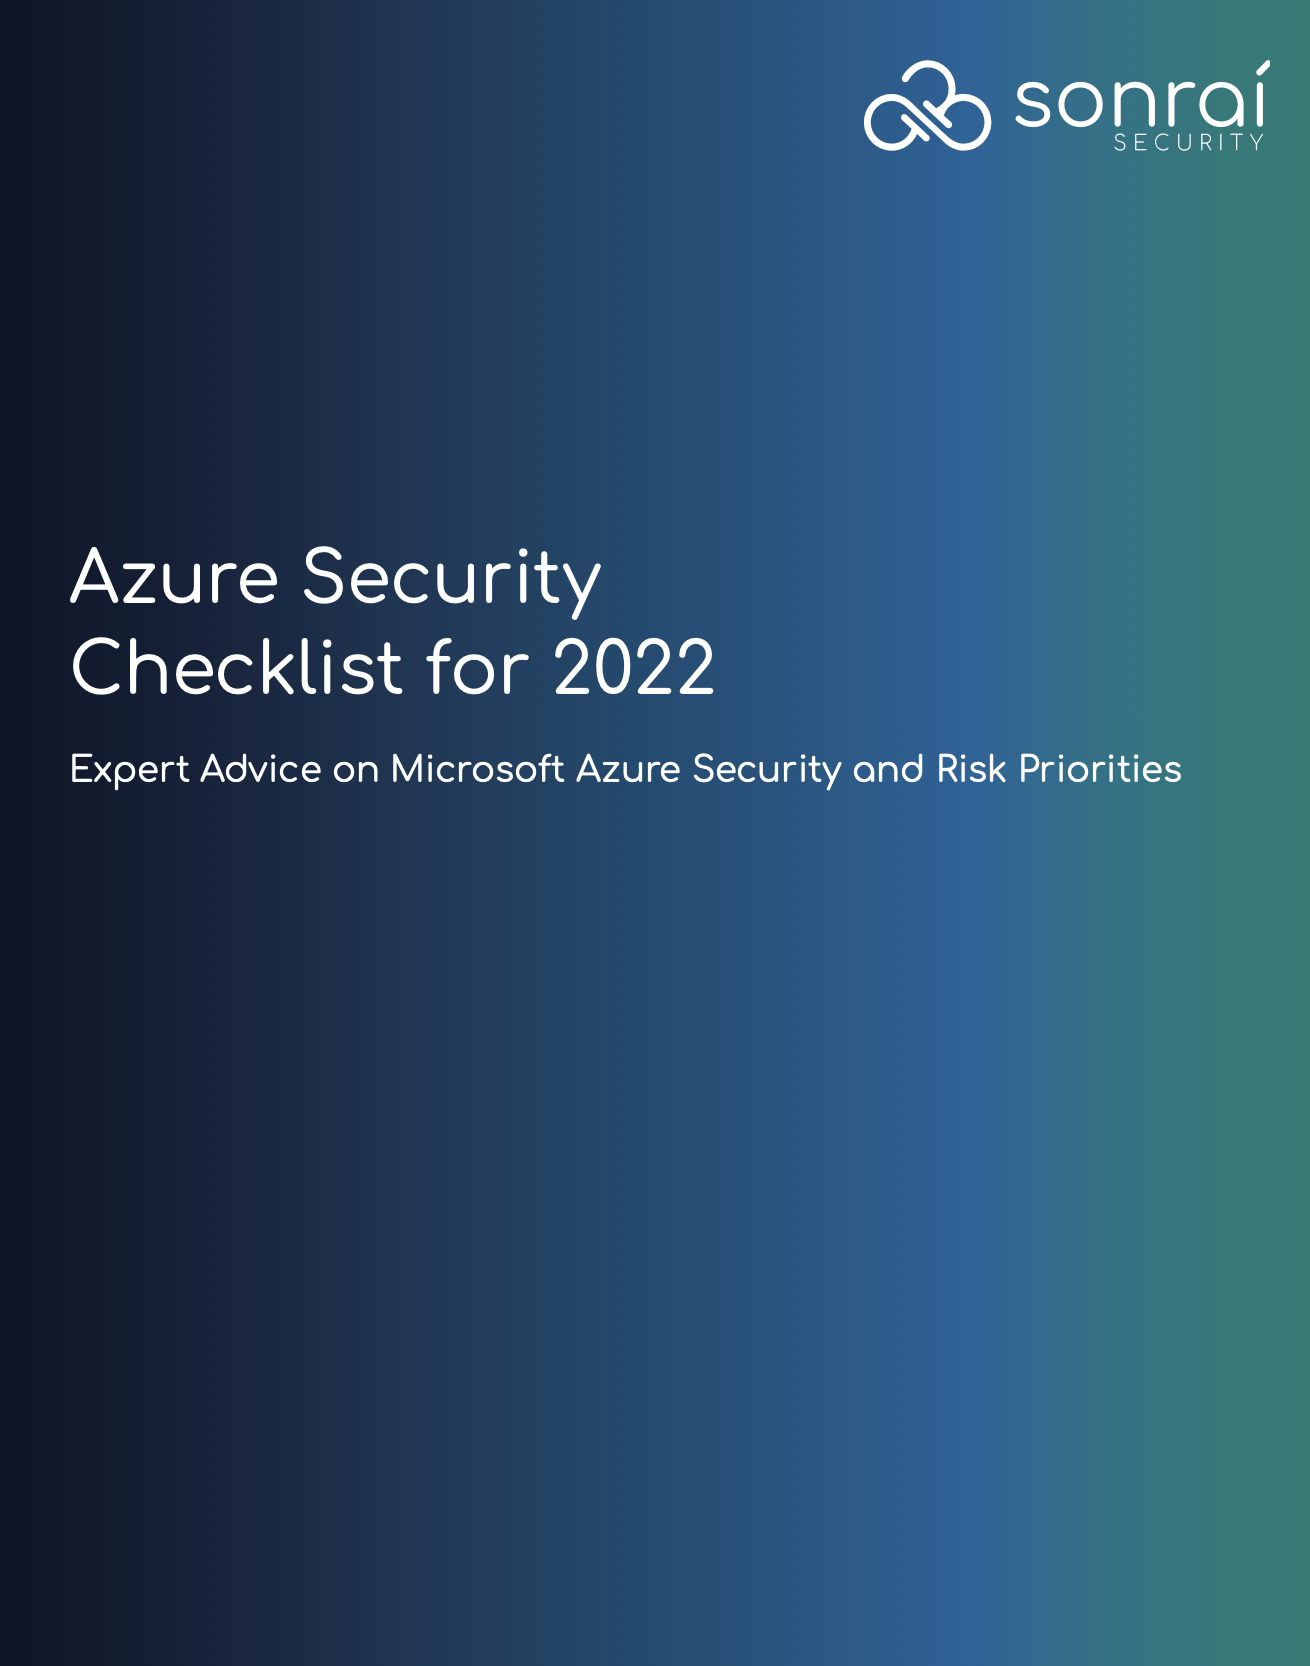 azure security cover - Azure Security Checklist for 2022